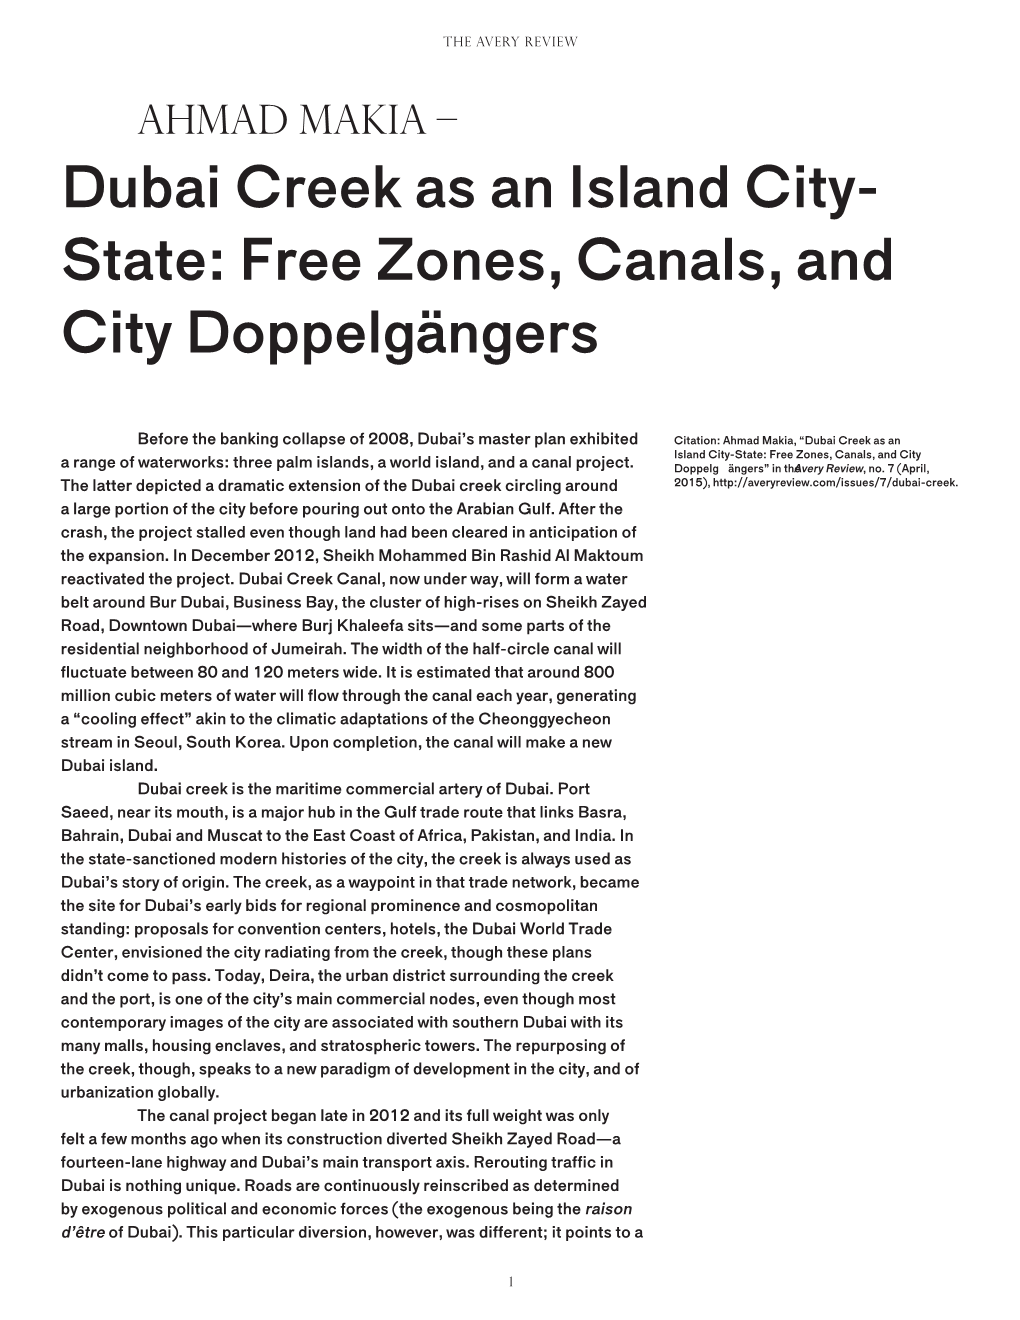 Dubai Creek As an Island City- State: Free Zones, Canals, and City Doppelgängers